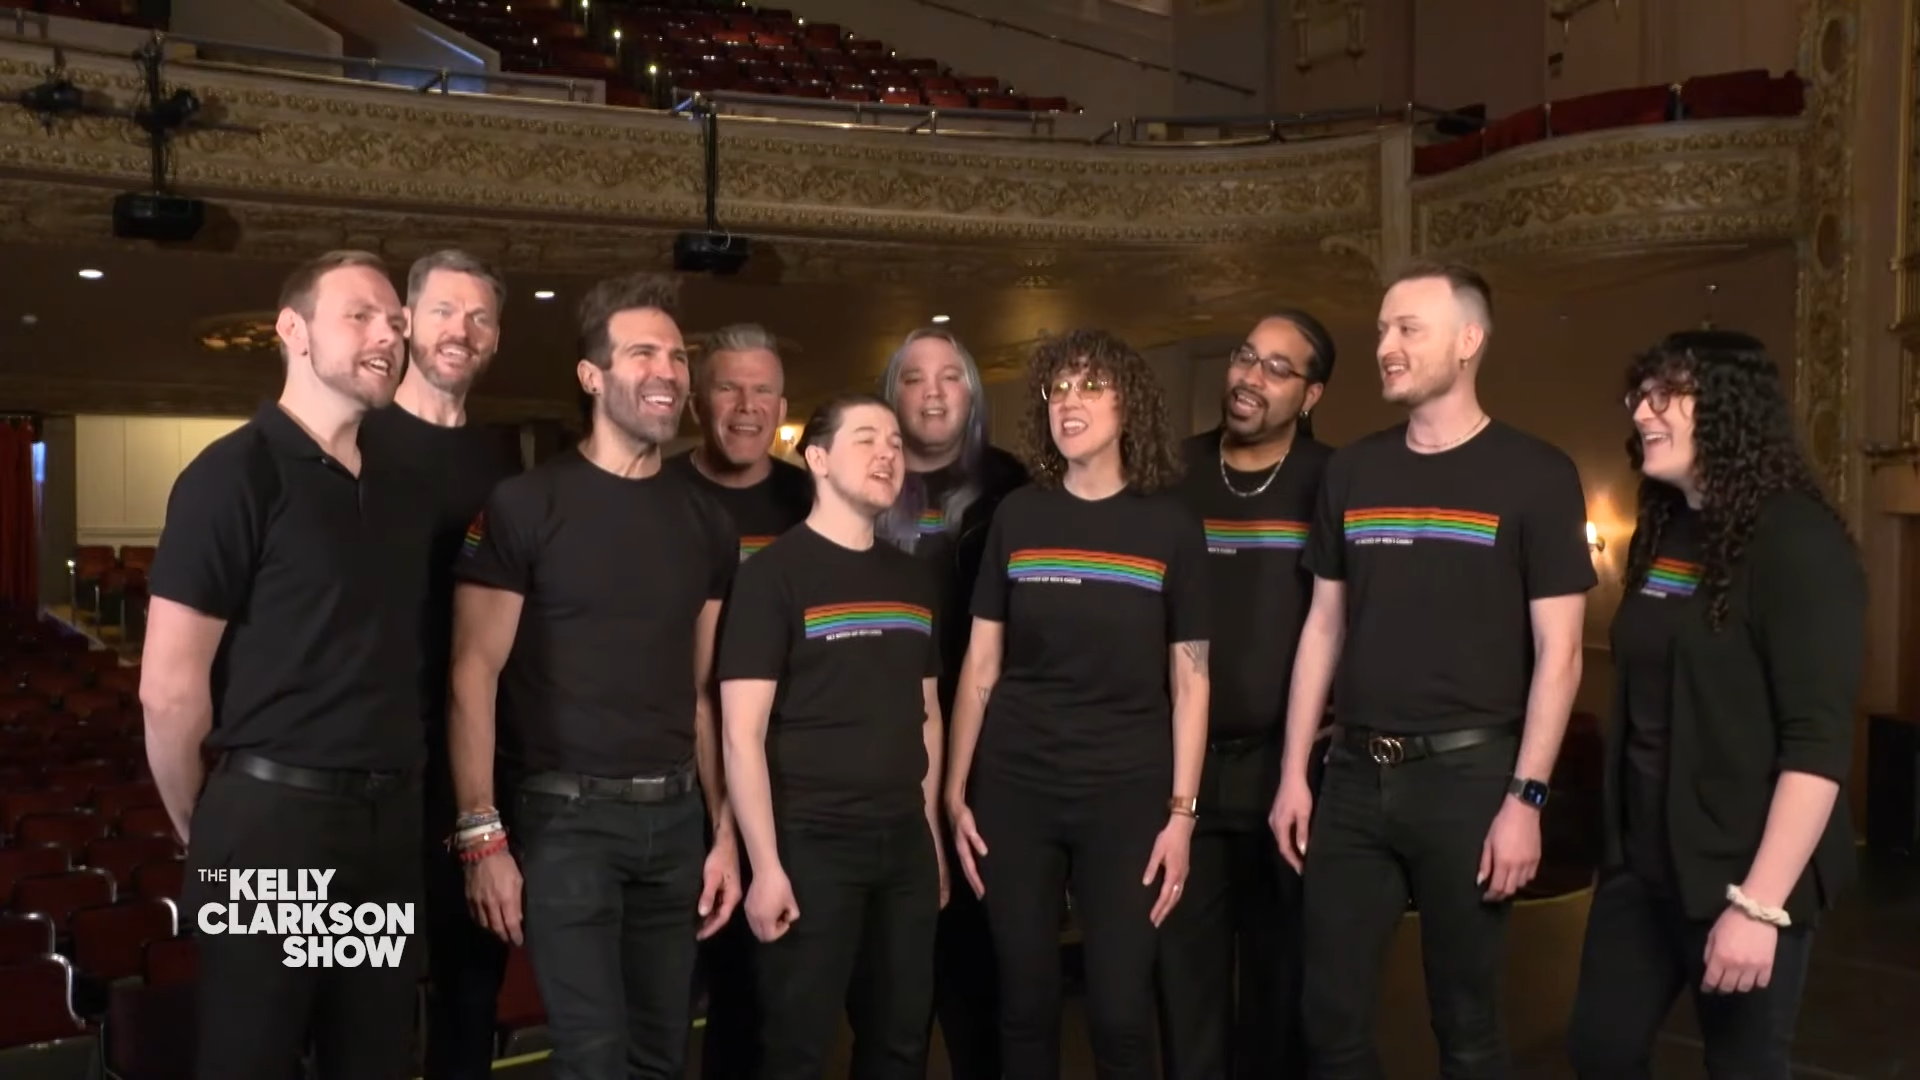 The Des Moines Gay Men's Chorus performing on the Kelly Clarkson Show